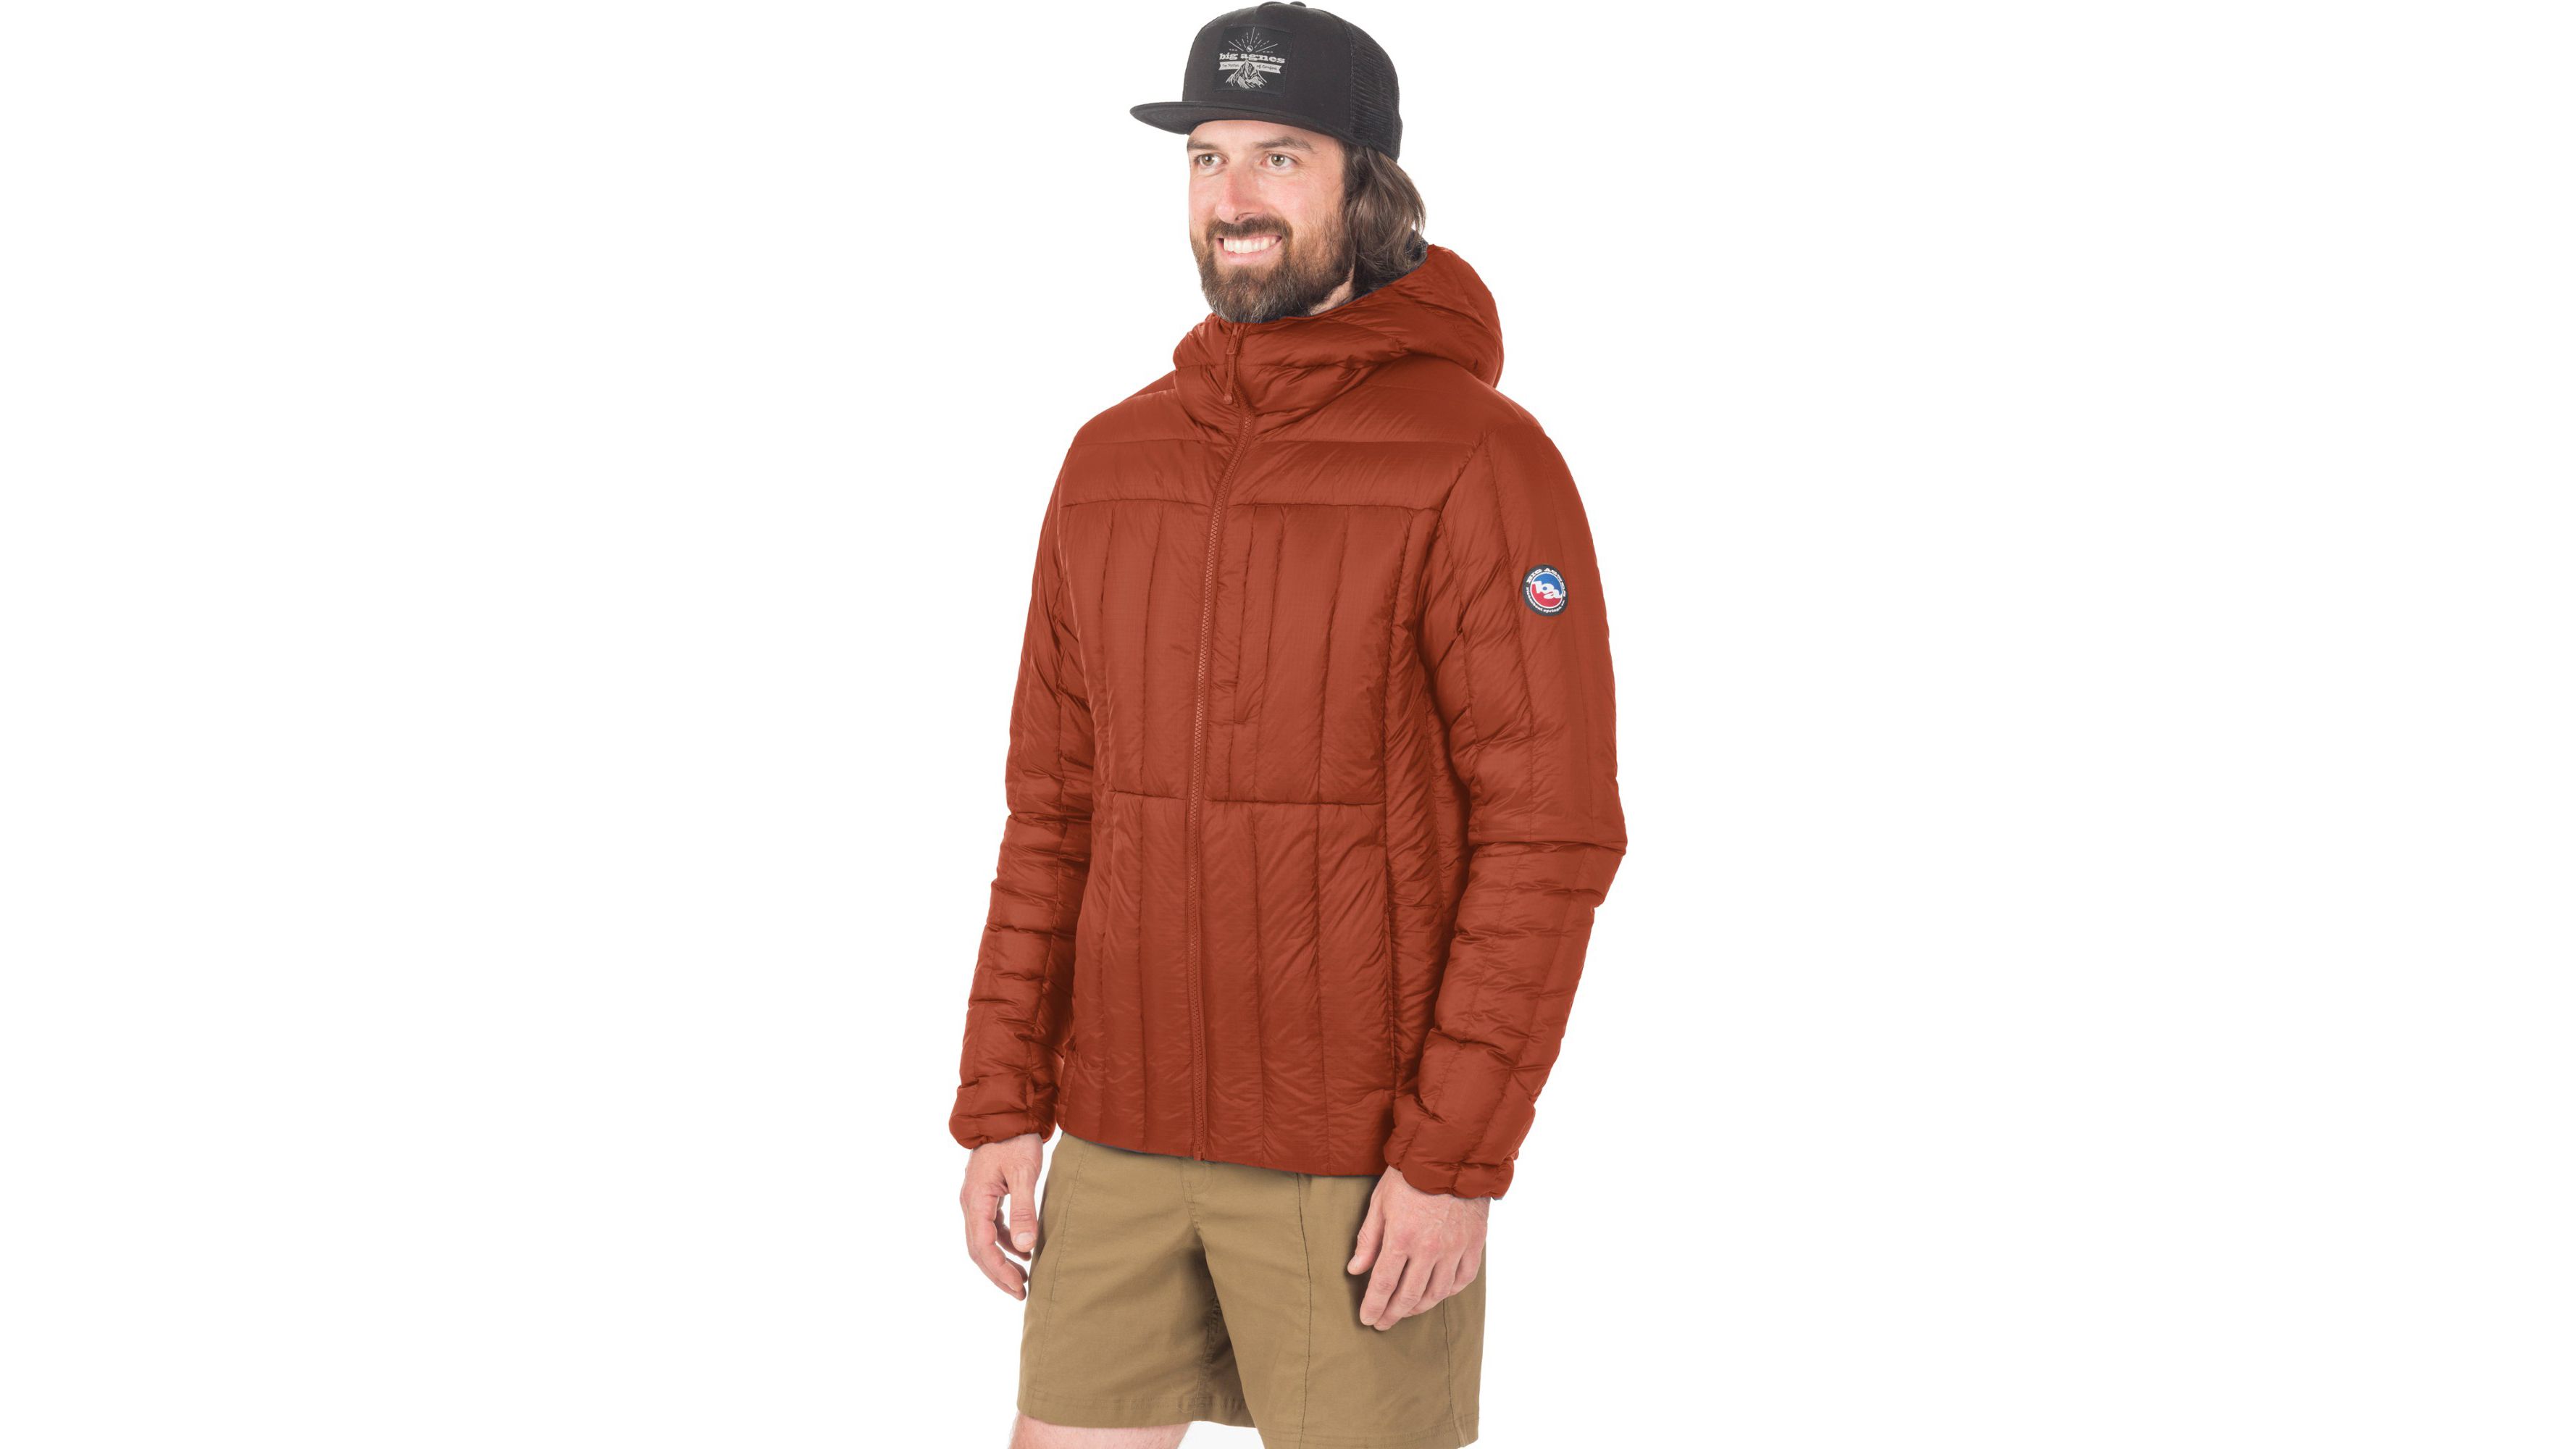 Save $20 when you spend $100 or more at REI Outlet - Clark Deals